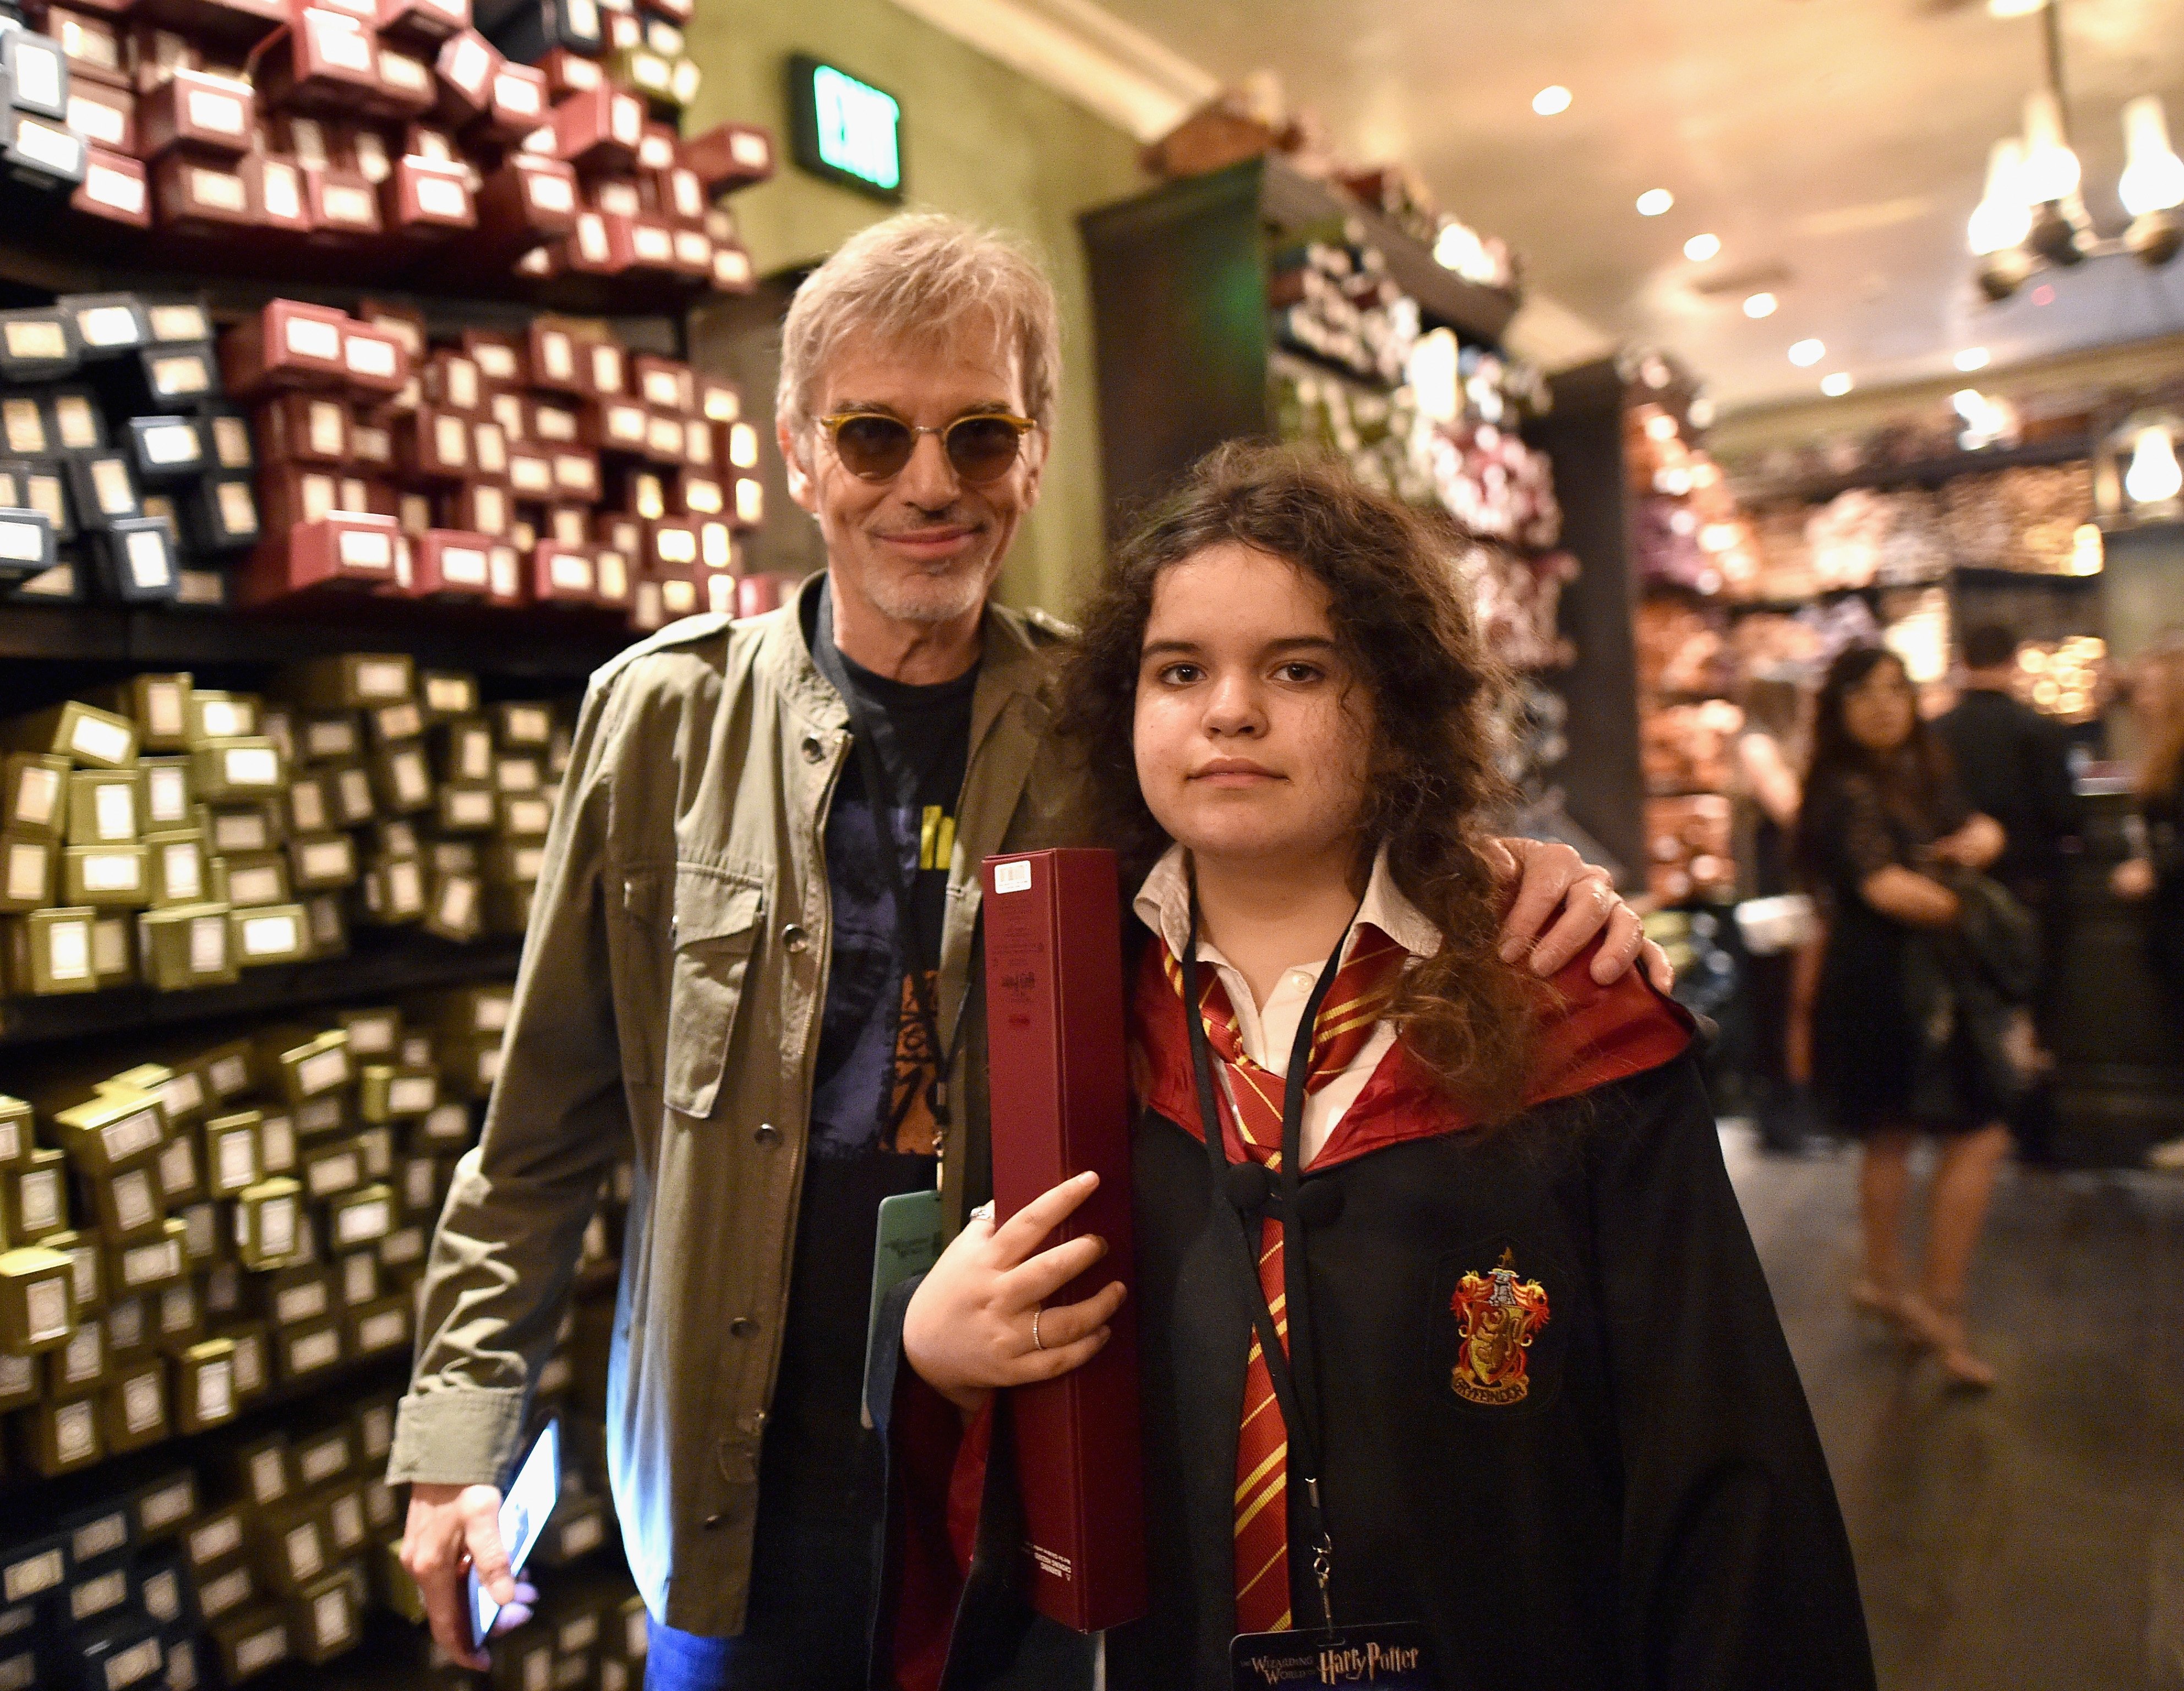 Actor Billy Bob Thornton and Bella Thornton during the "Wizarding World of Harry Potter" opening at Universal Studios in Hollywood on April 5, 2016. | Source: Getty Images